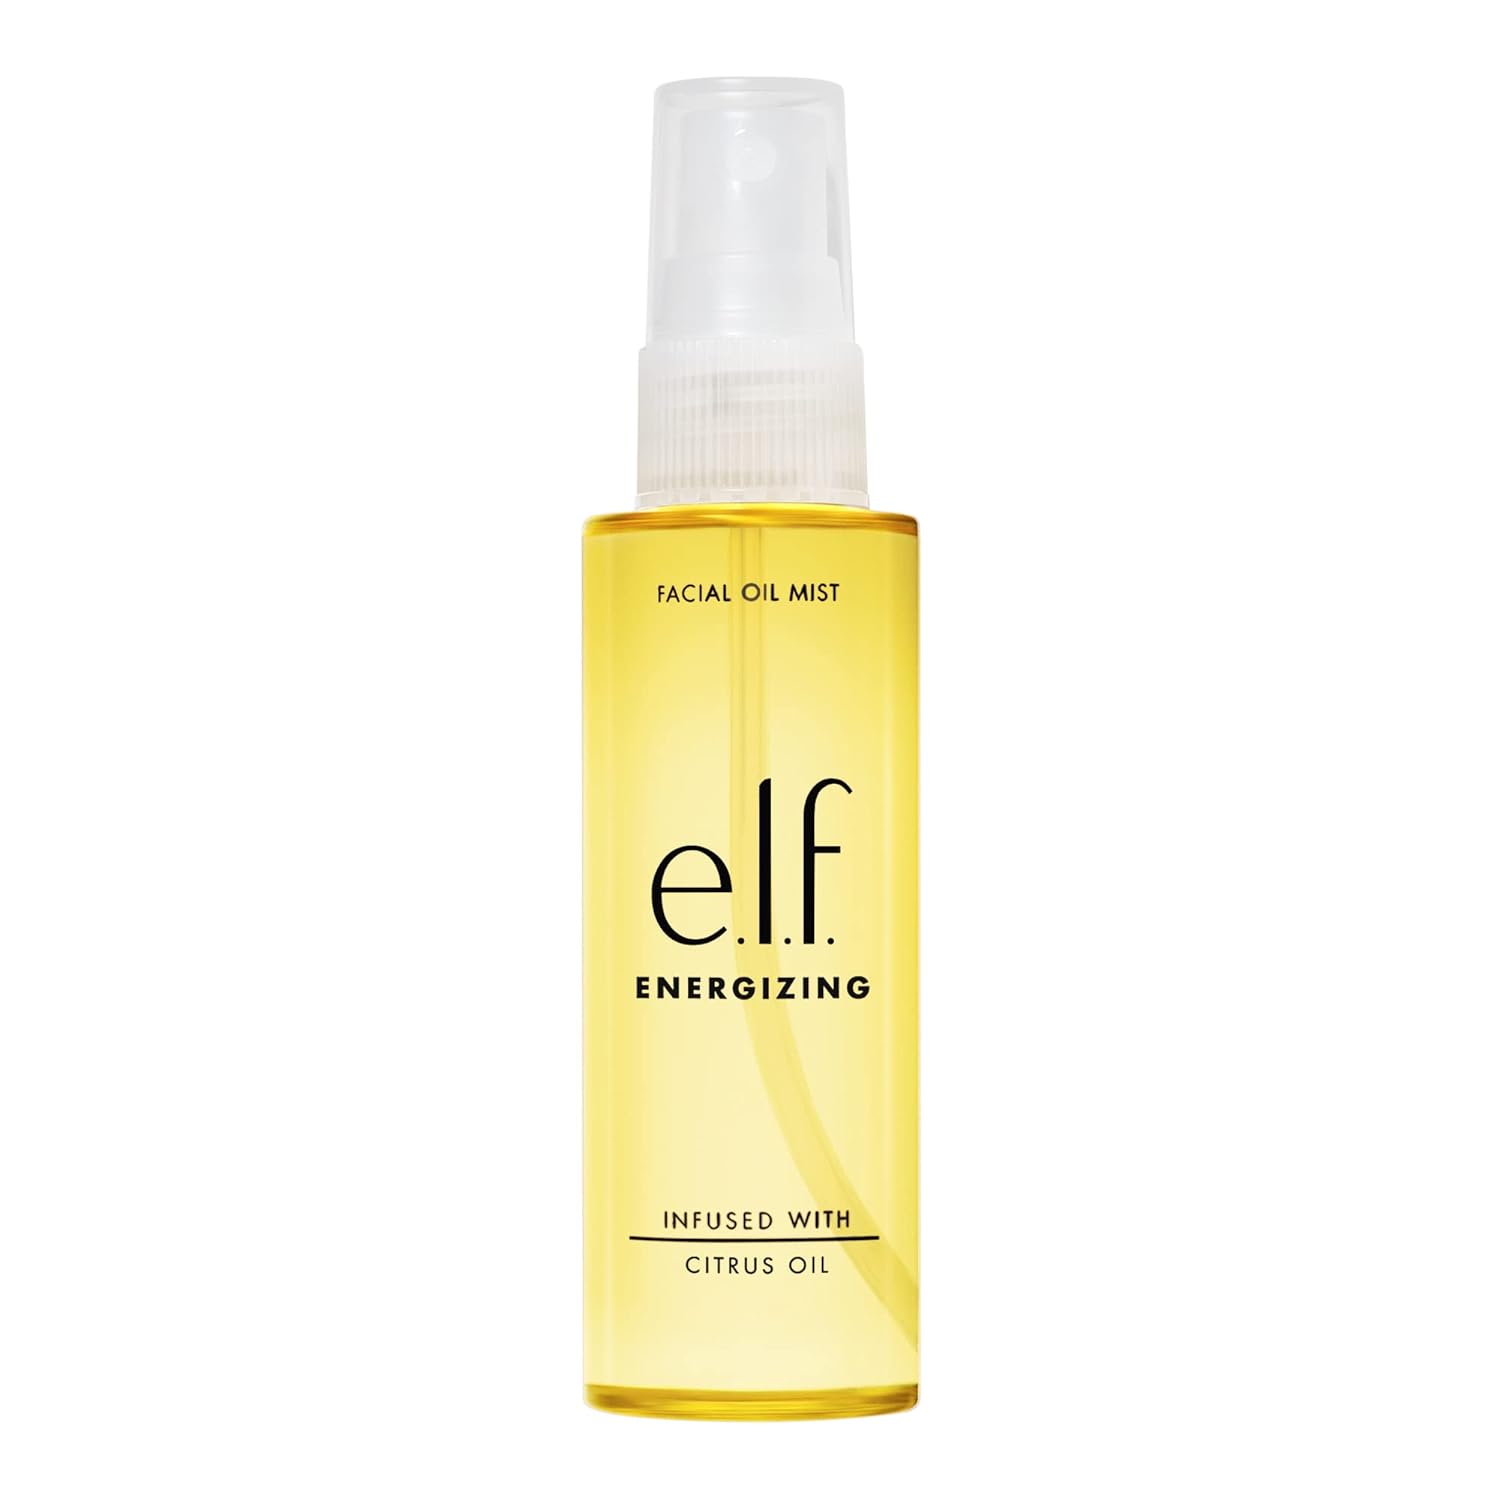 e.l.f. Energizing Facial Oil Mist, Essential Oil-infused Facial Mist, Helps Uplift Your Mood & Mind, Refreshing, Vegan & Cruelty-Free, 2.02